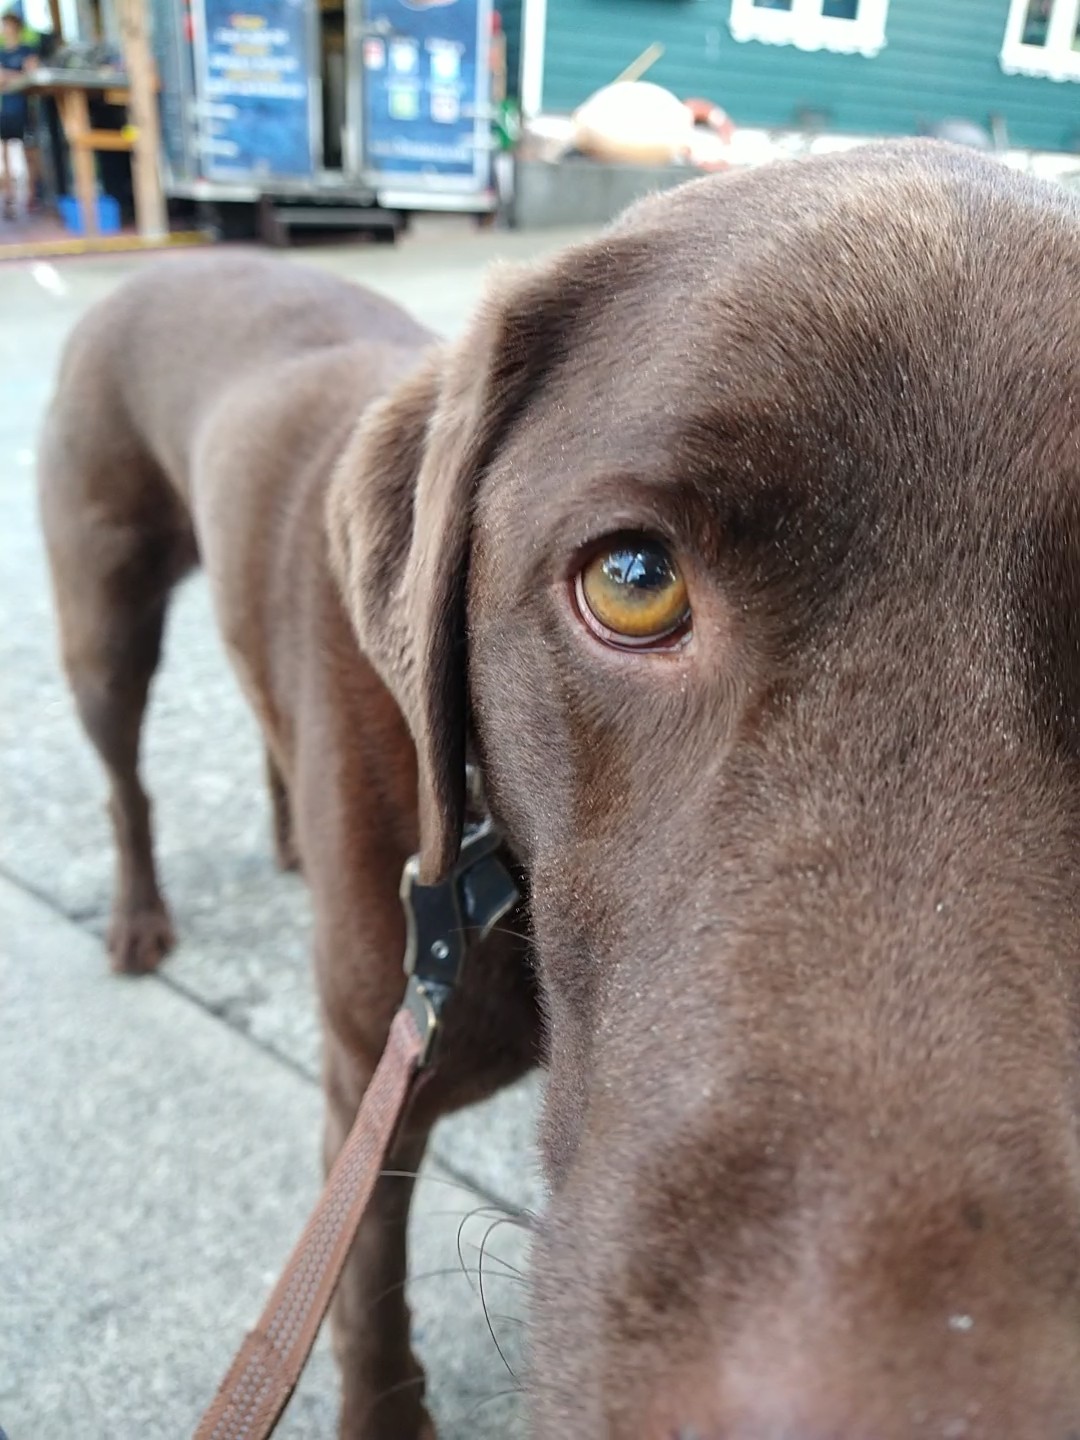 Reflection of author in a Chocolate Lab's eye.